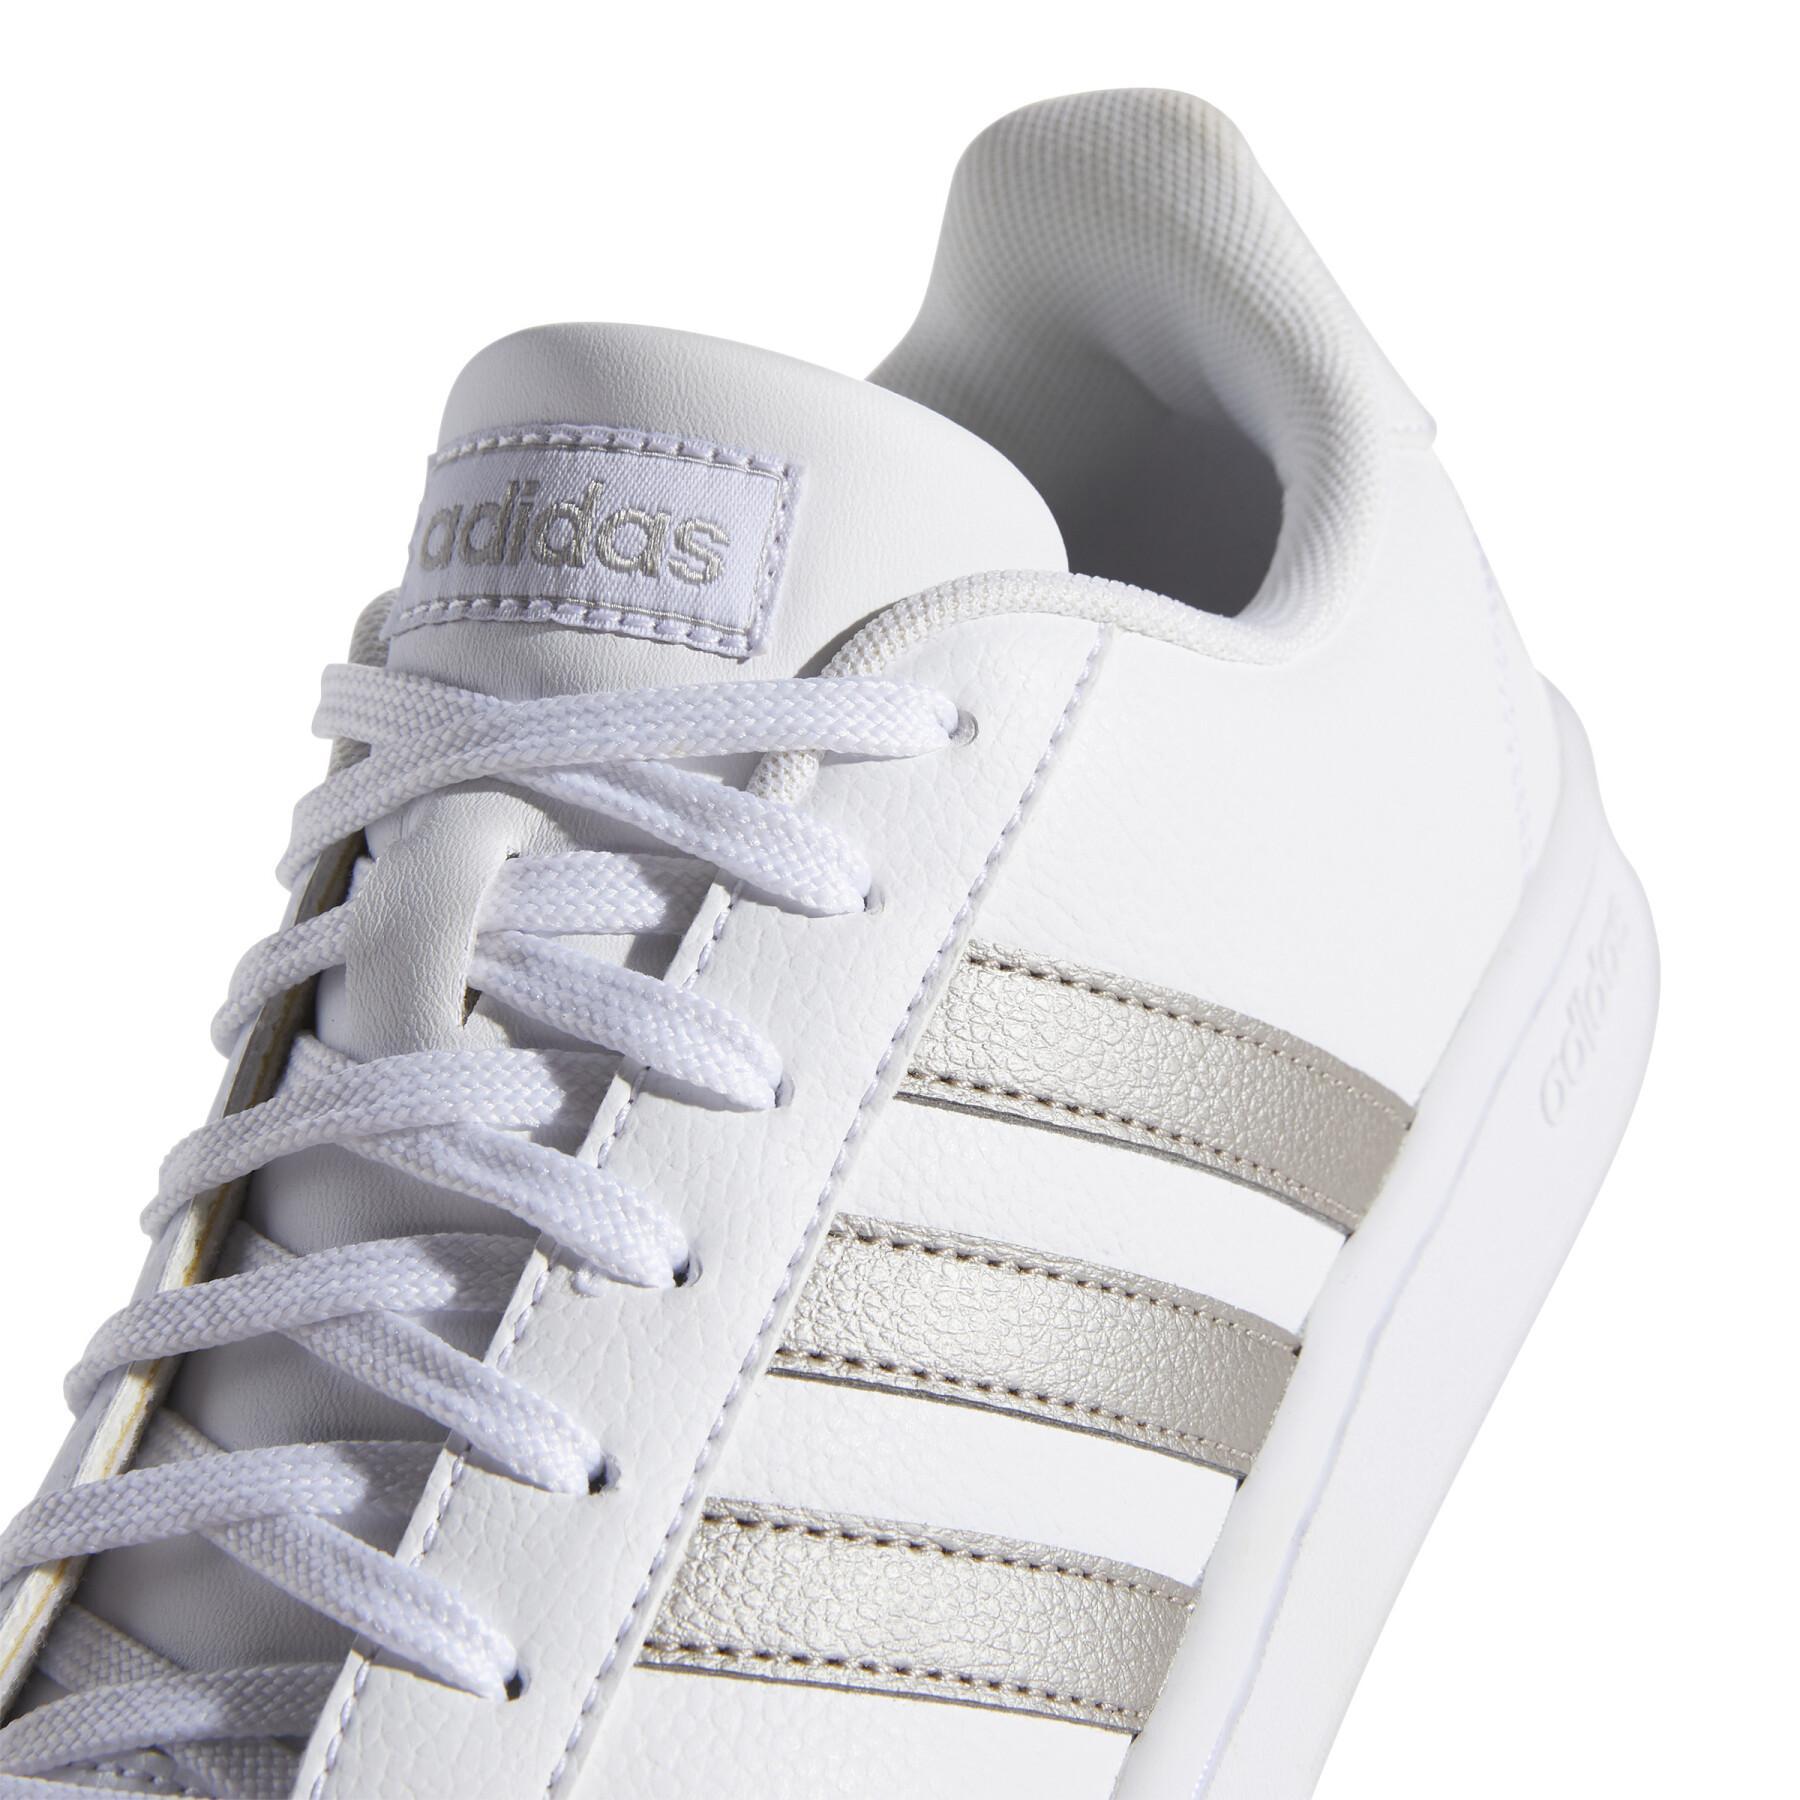 Women's sneakers adidas Grand Court